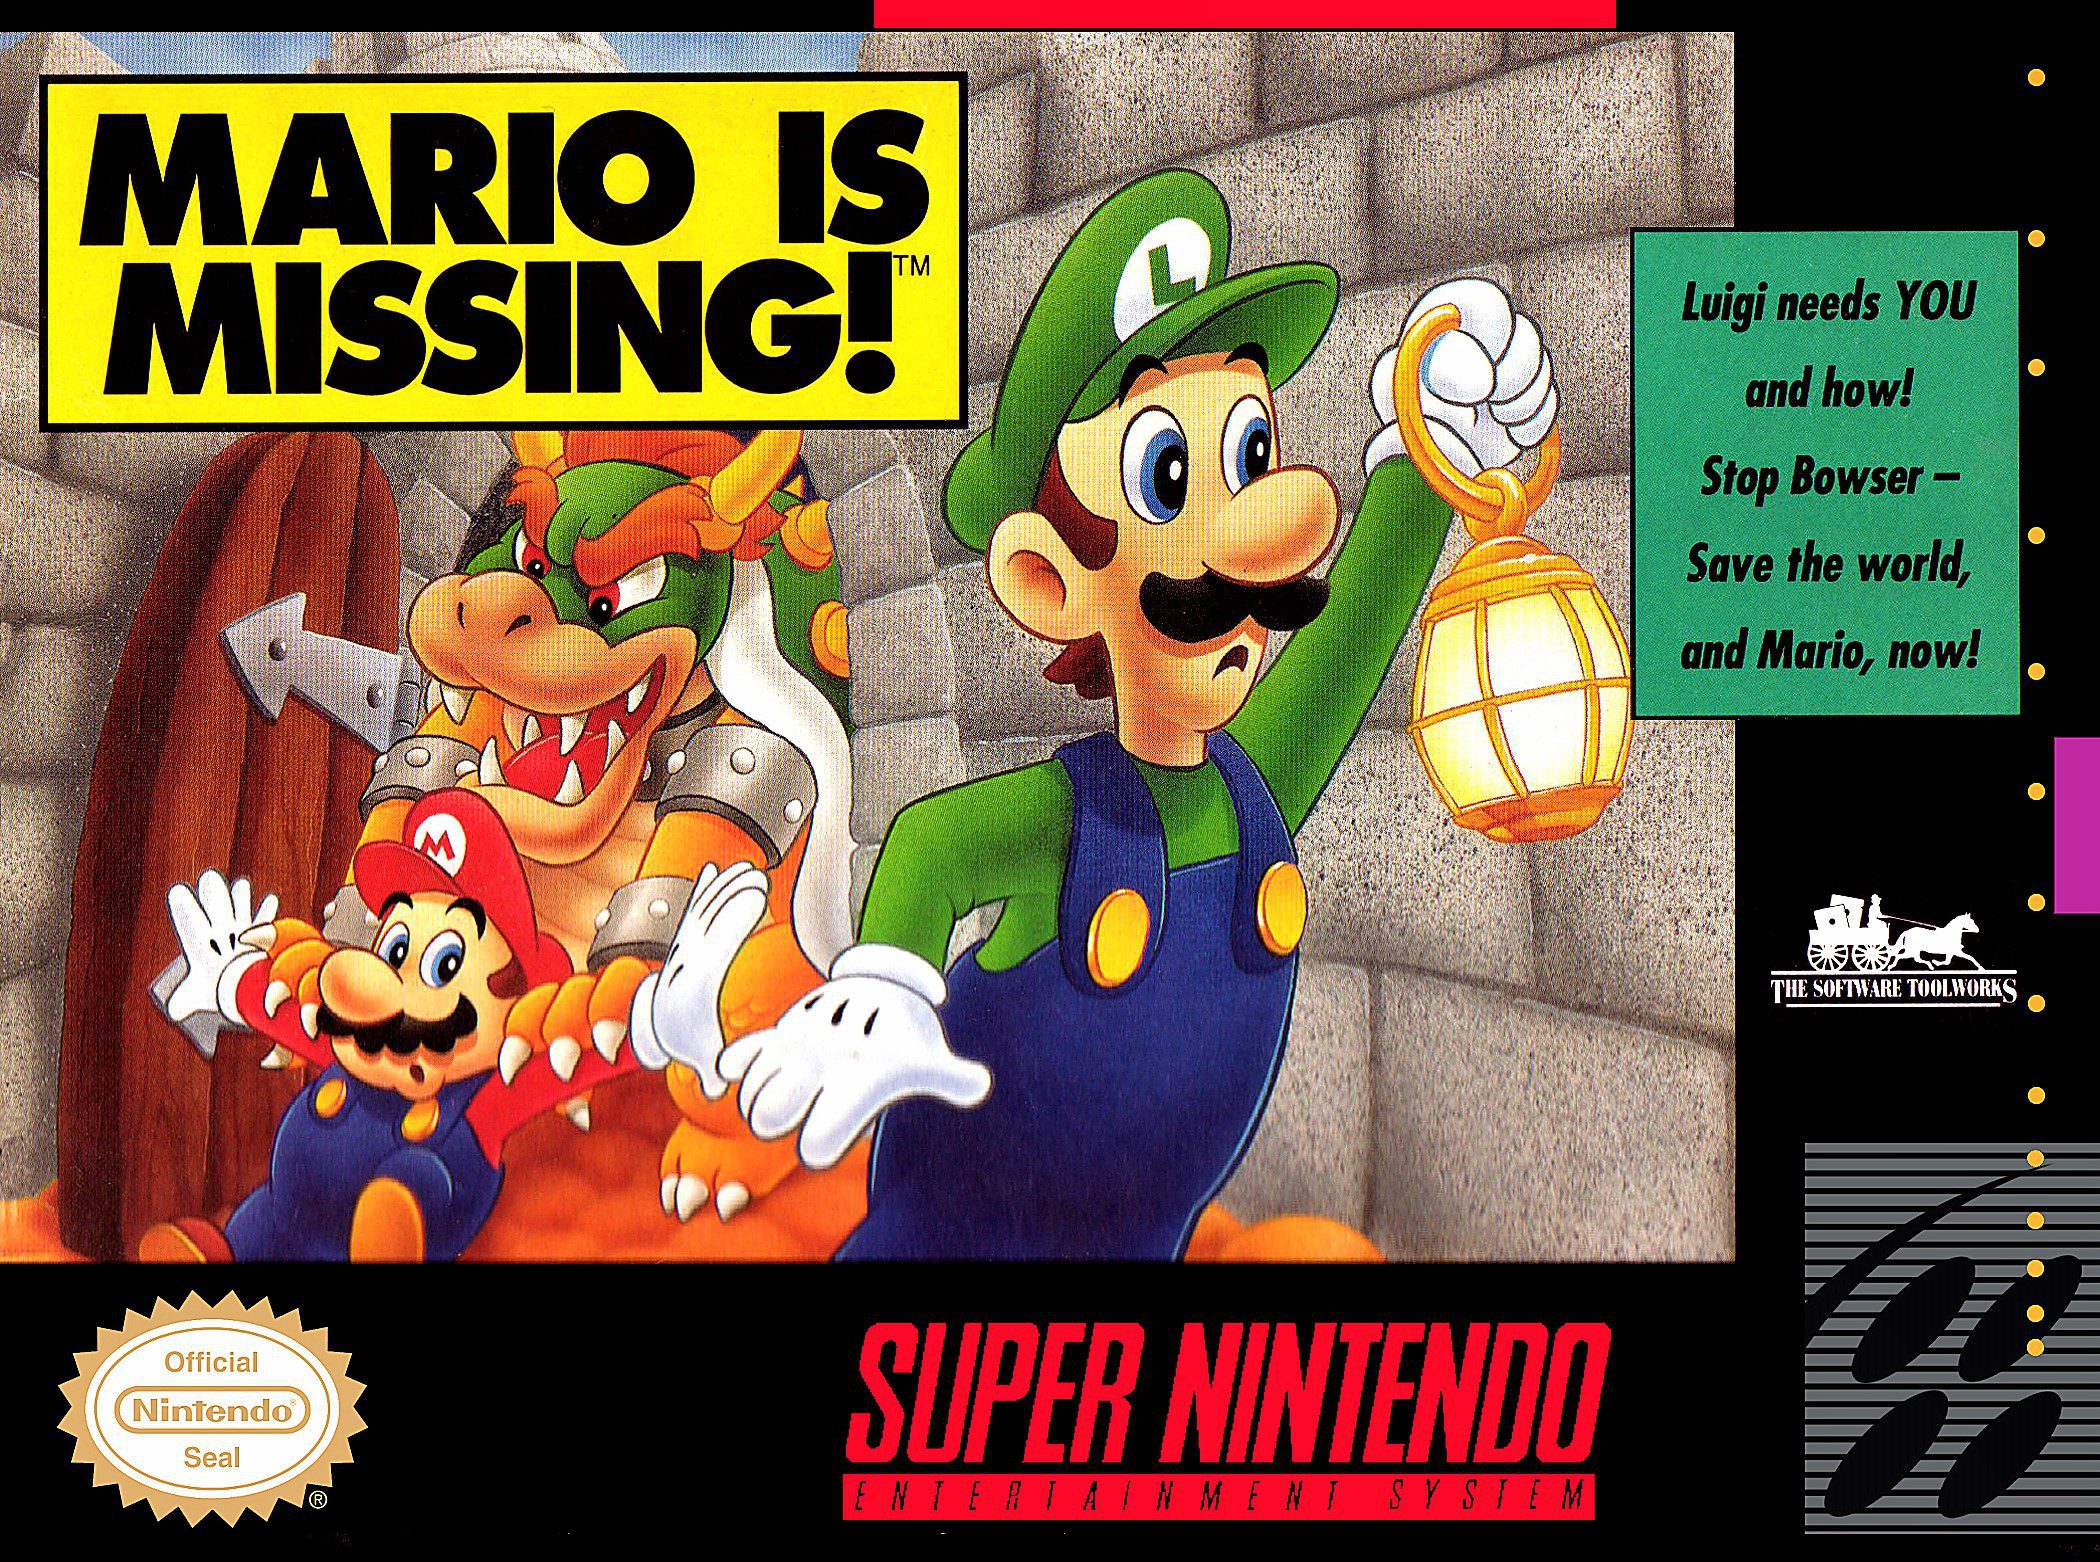 Mario is Missing! for Super Nintendo Entertainment System (SNES)